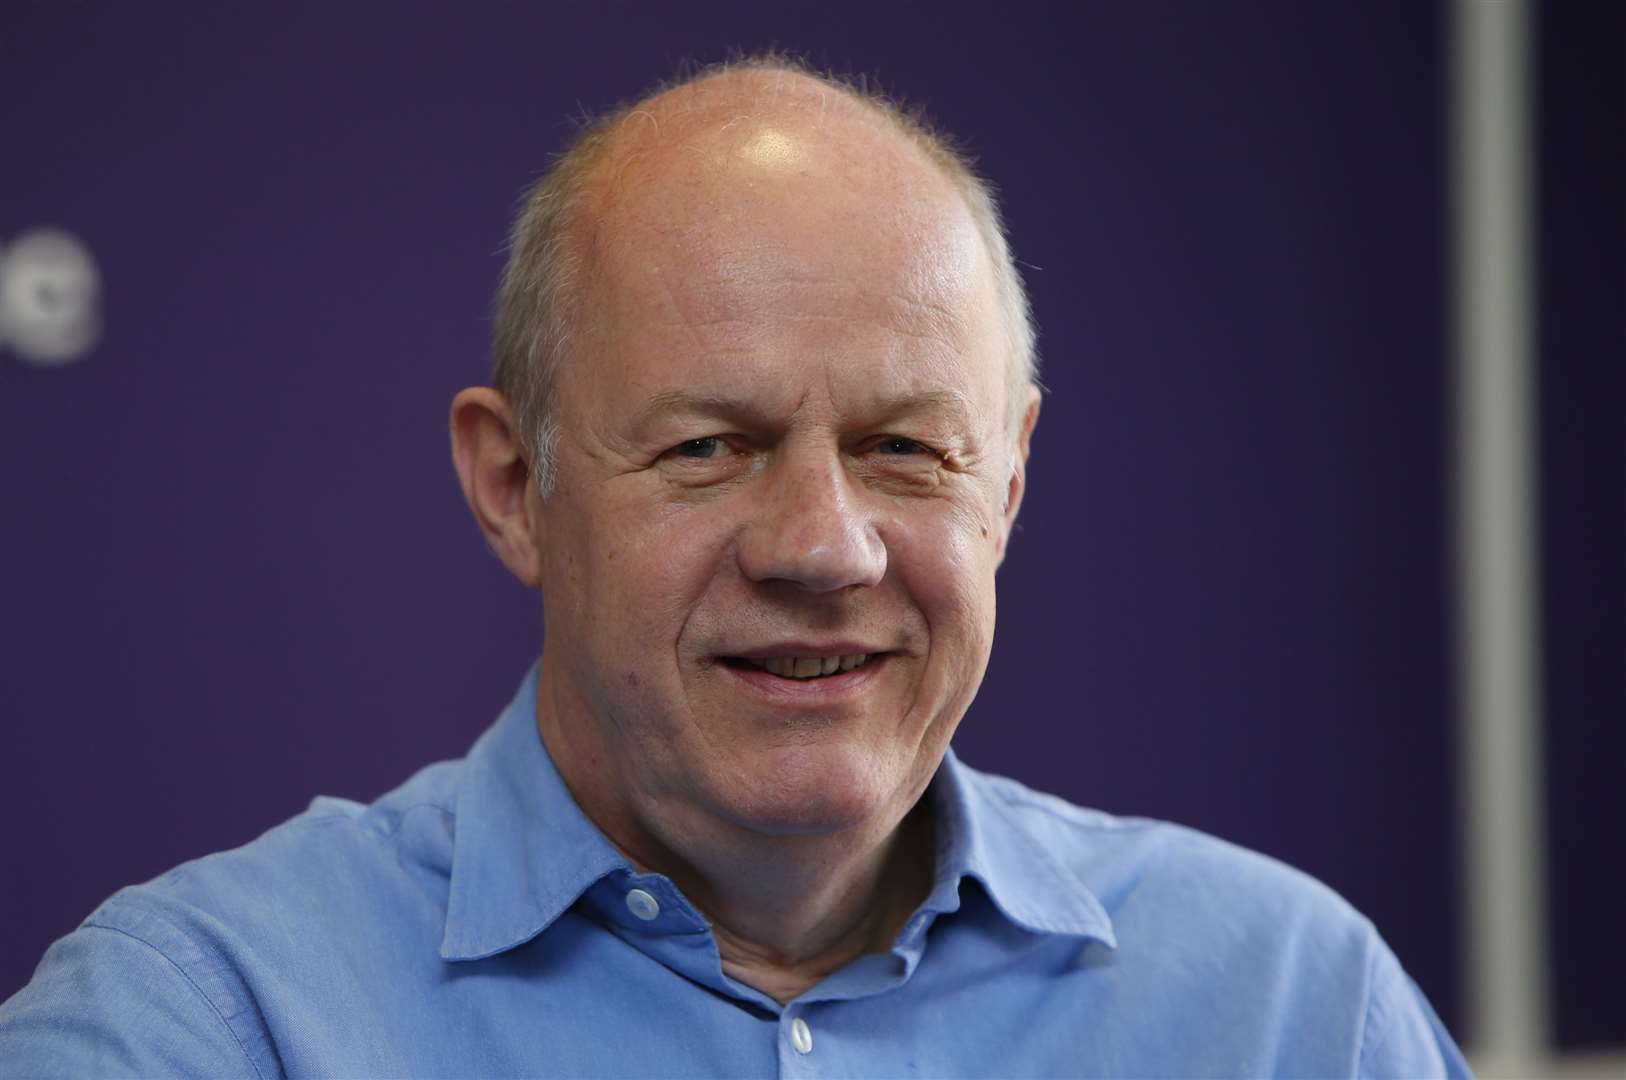 Damian Green has been calling on the government to open a new testing centre in Ashford